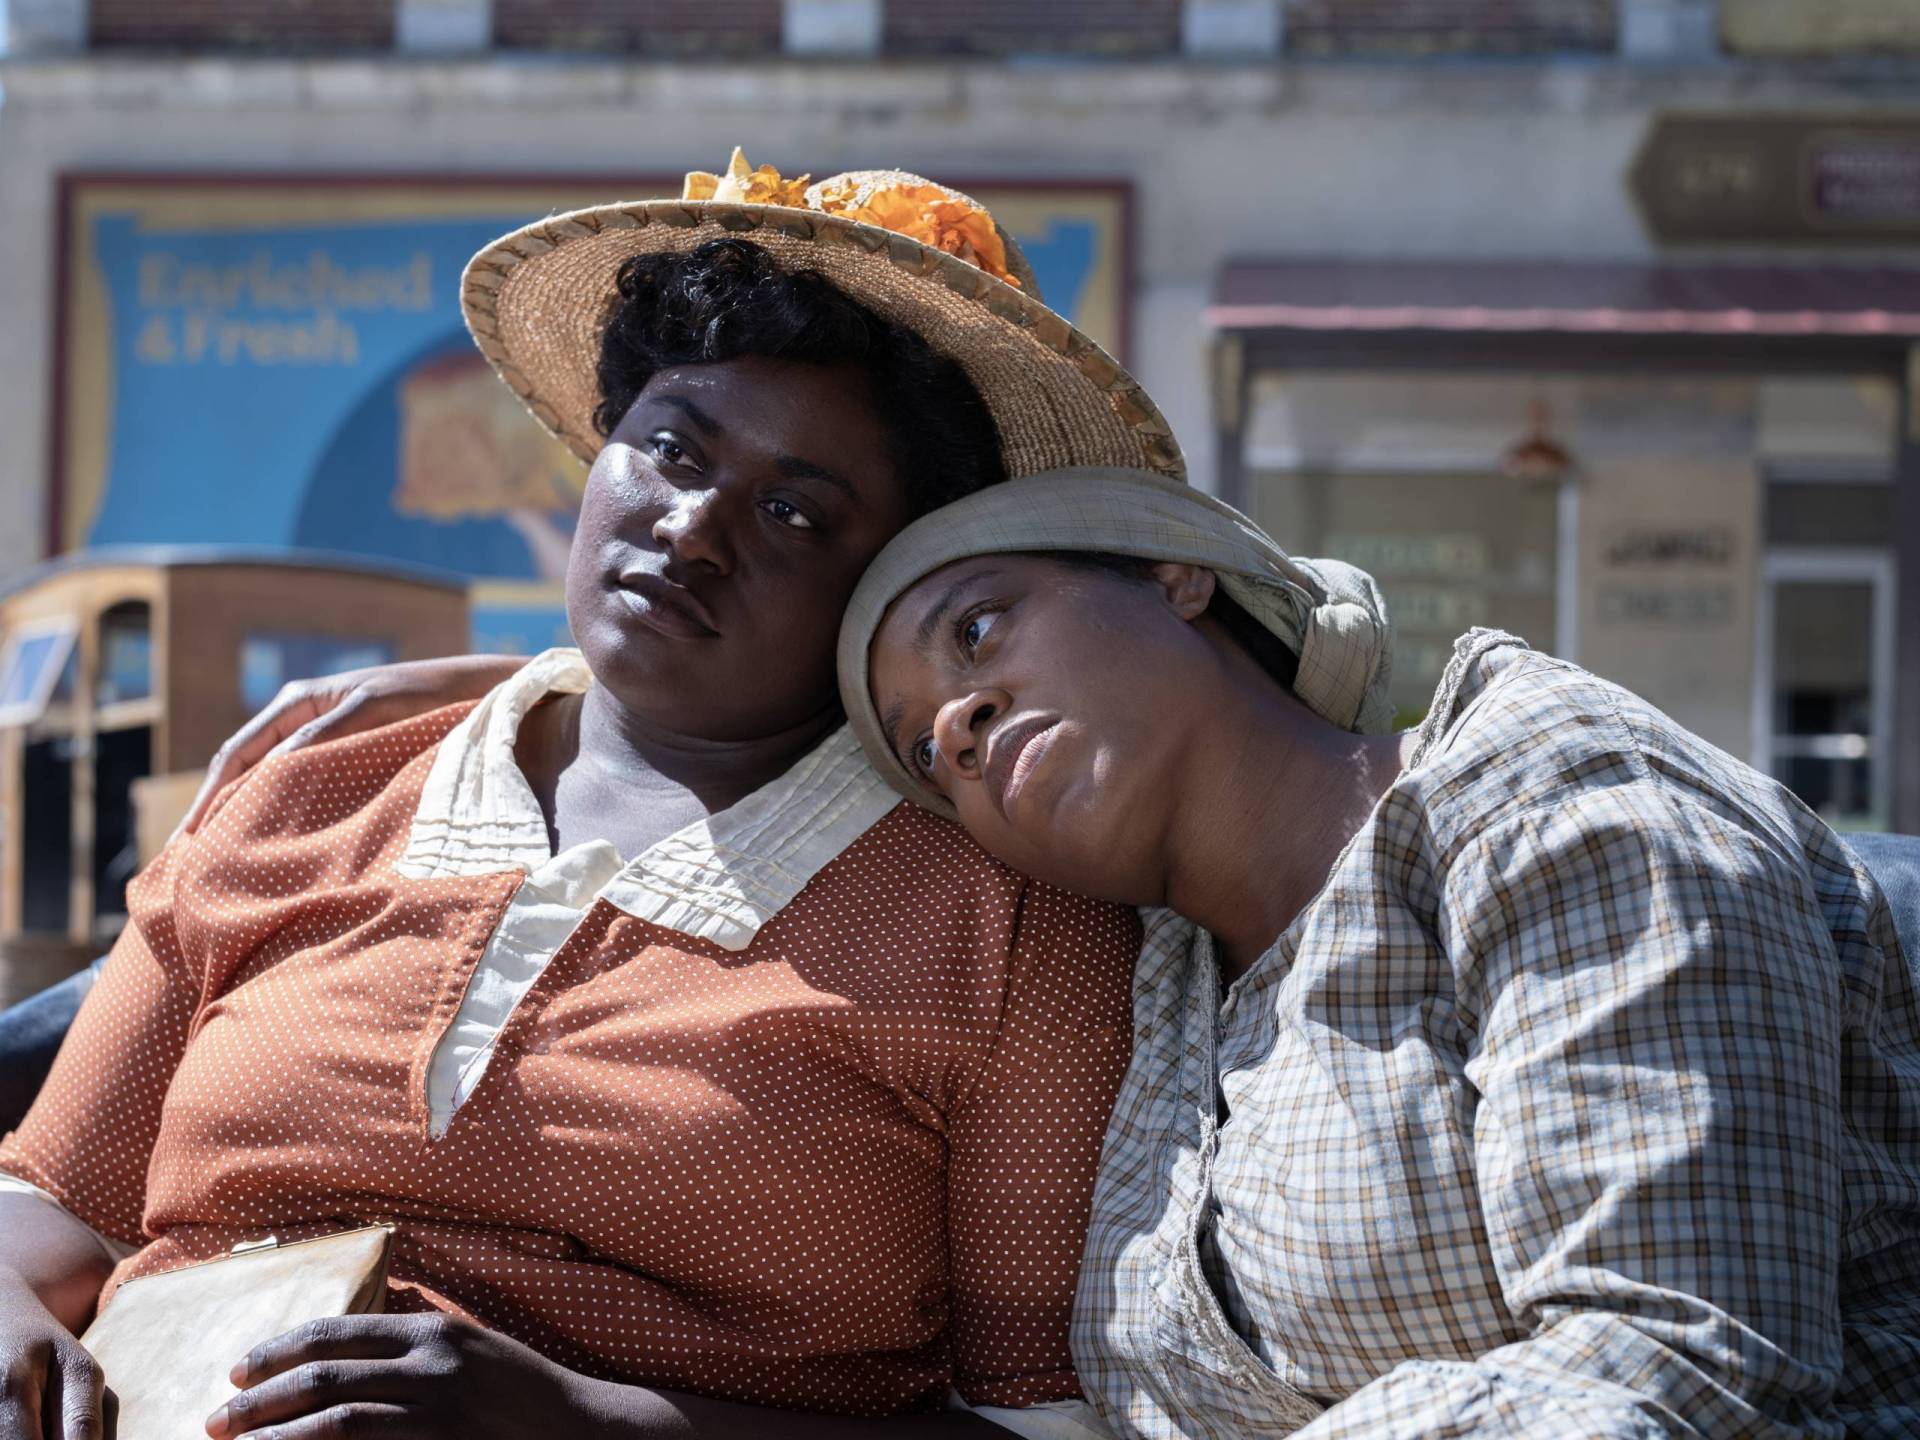 Two Black women sit outdoors in the sun, their heads leaning on one another. They look dejected.